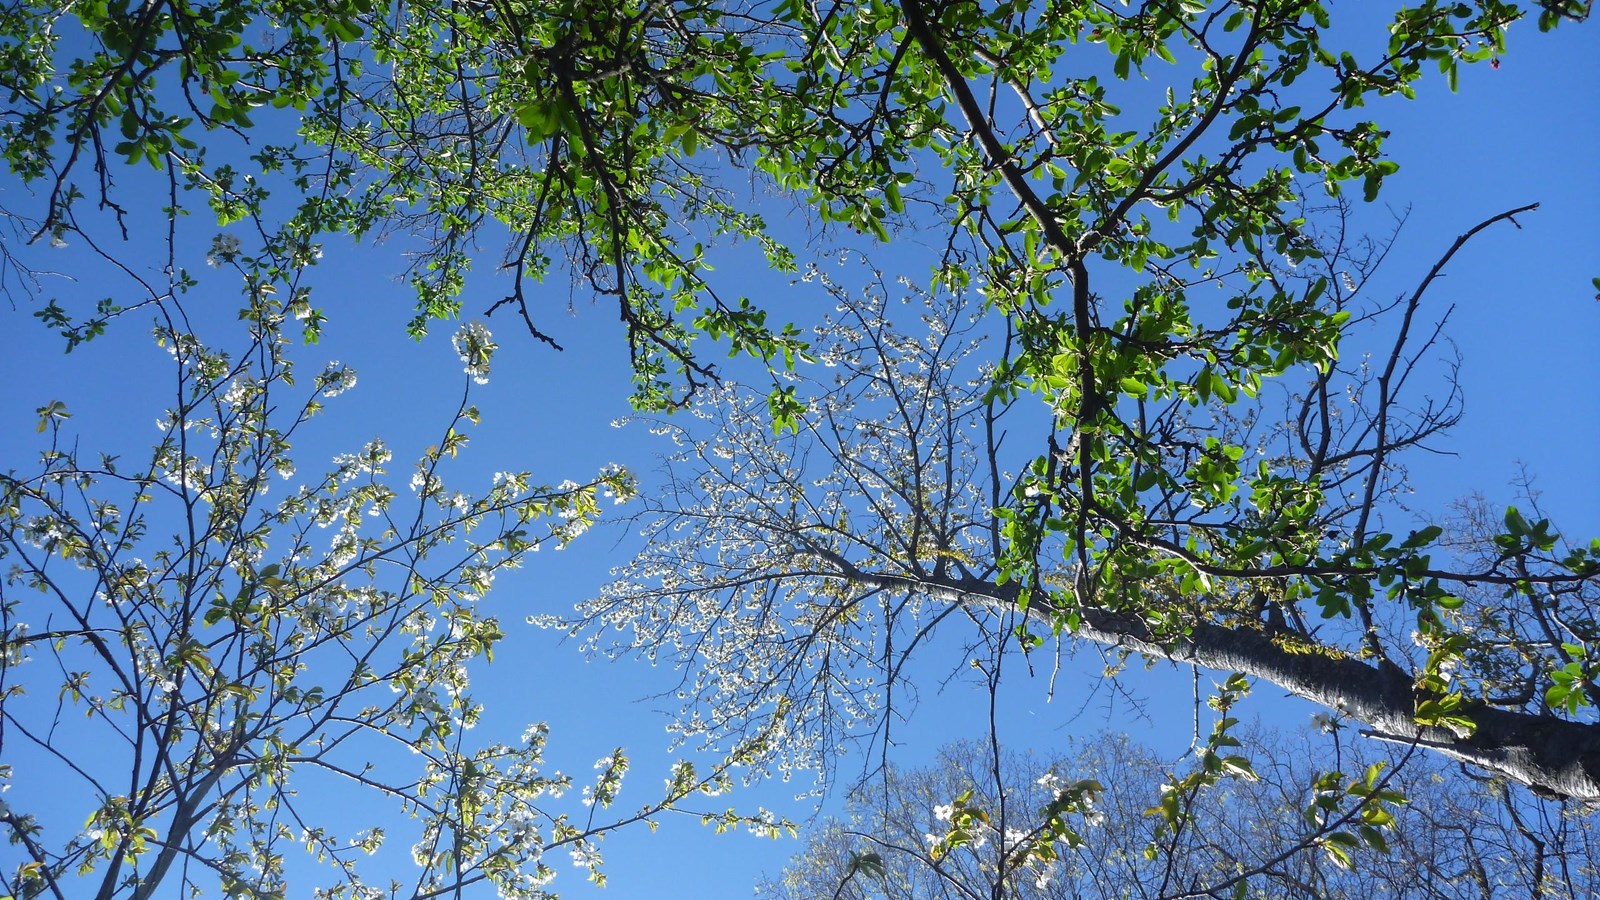 the tops of multiple trees with small white flowers and green leaves with a bright blue sky be